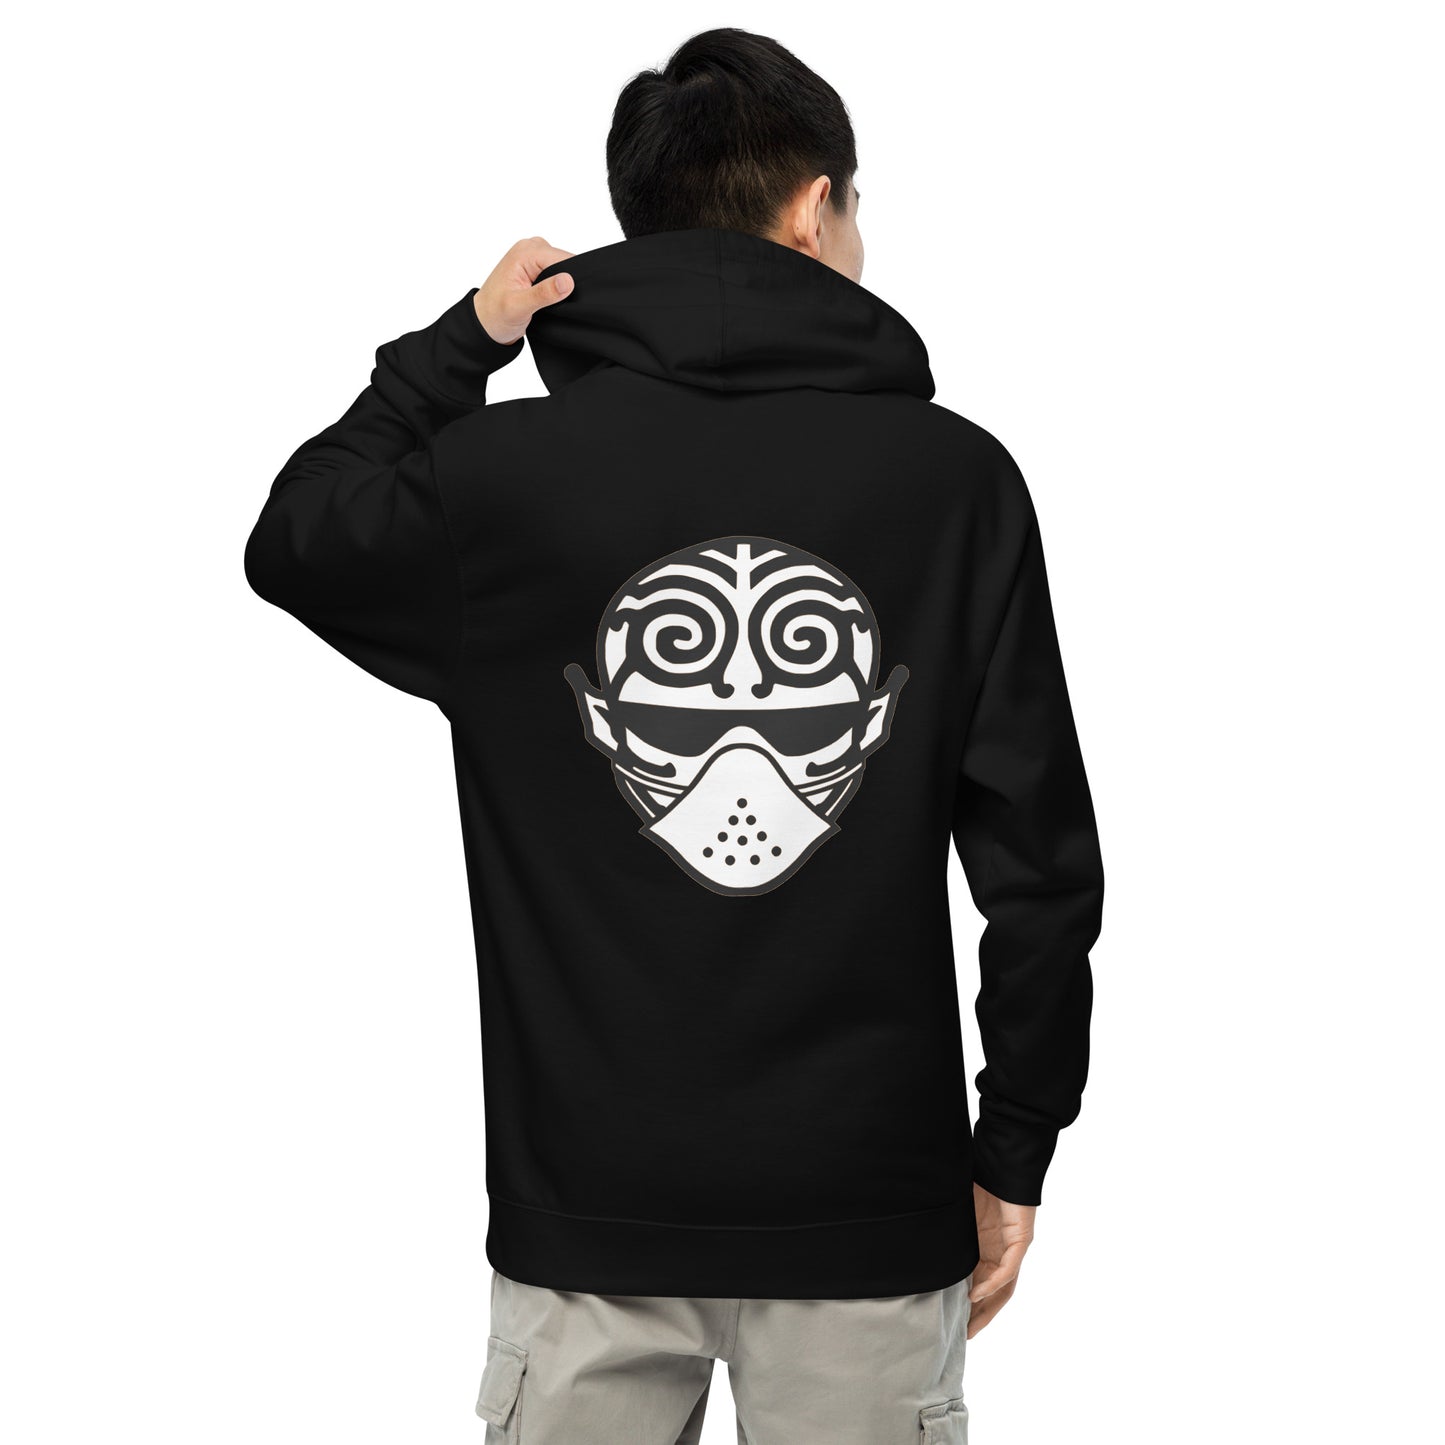 DR. BME (Unisex midweight pullover hoodie)